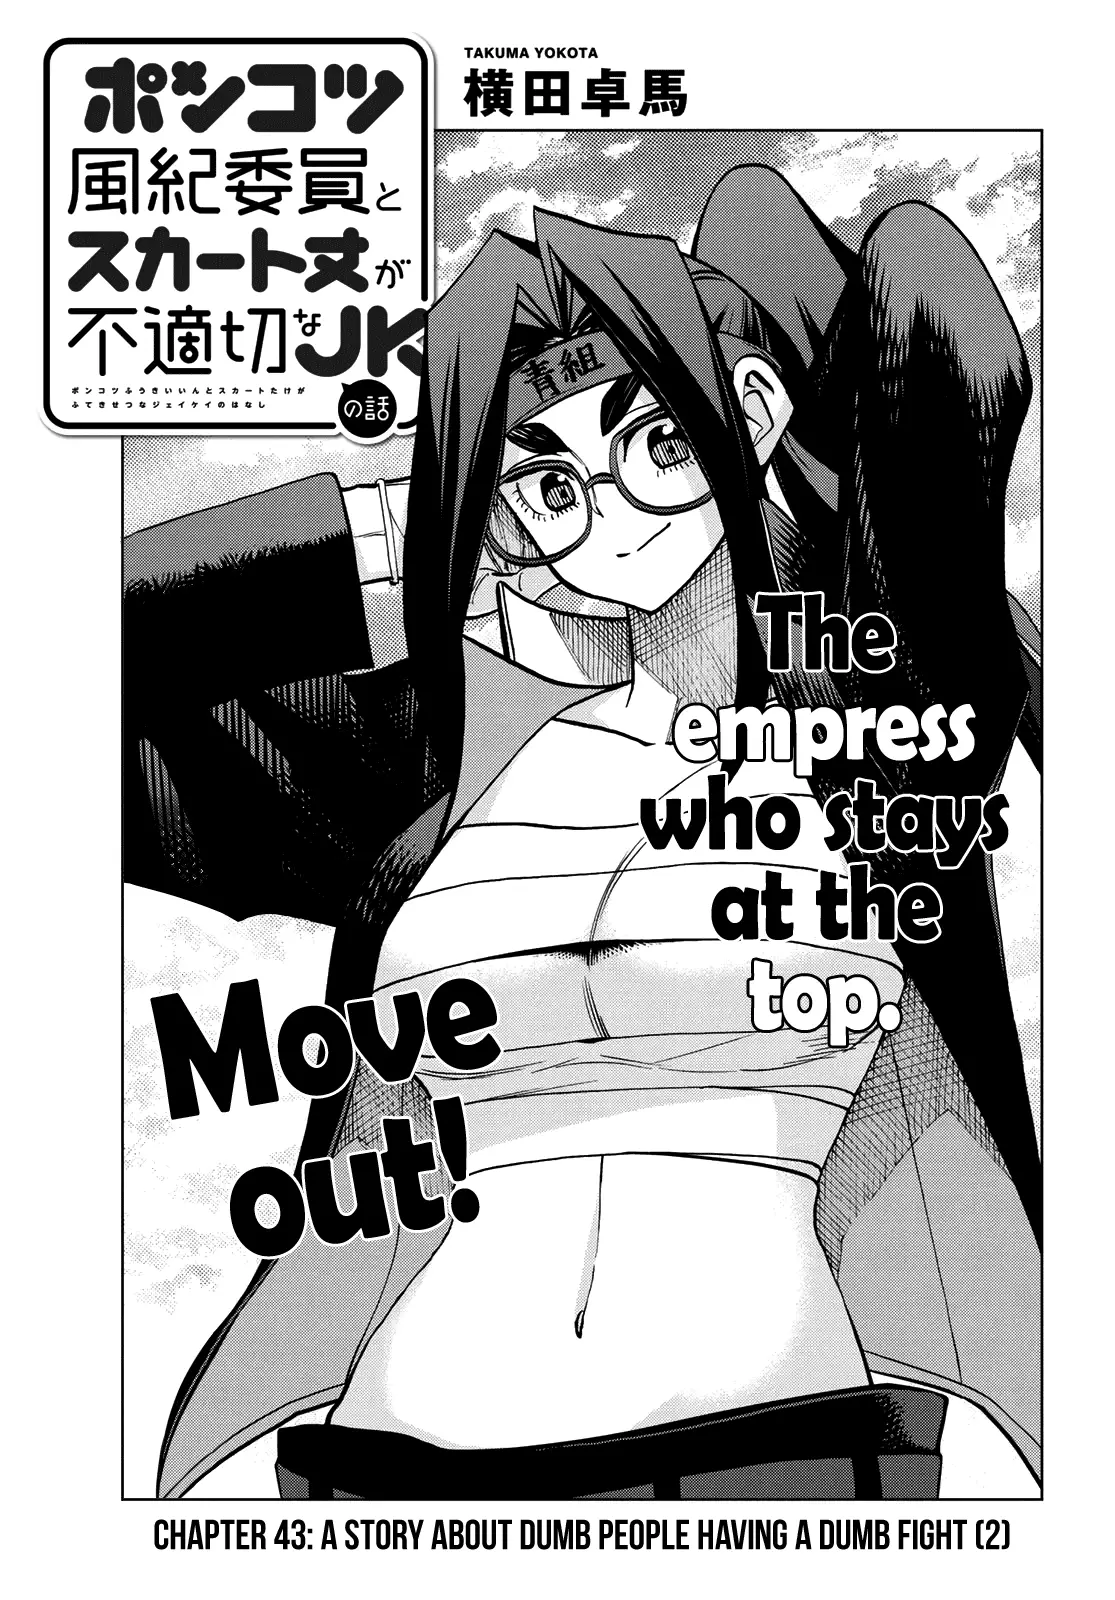 The Story Between A Dumb Prefect And A High School Girl With An Inappropriate Skirt Length - 44 page 1-929a62f7